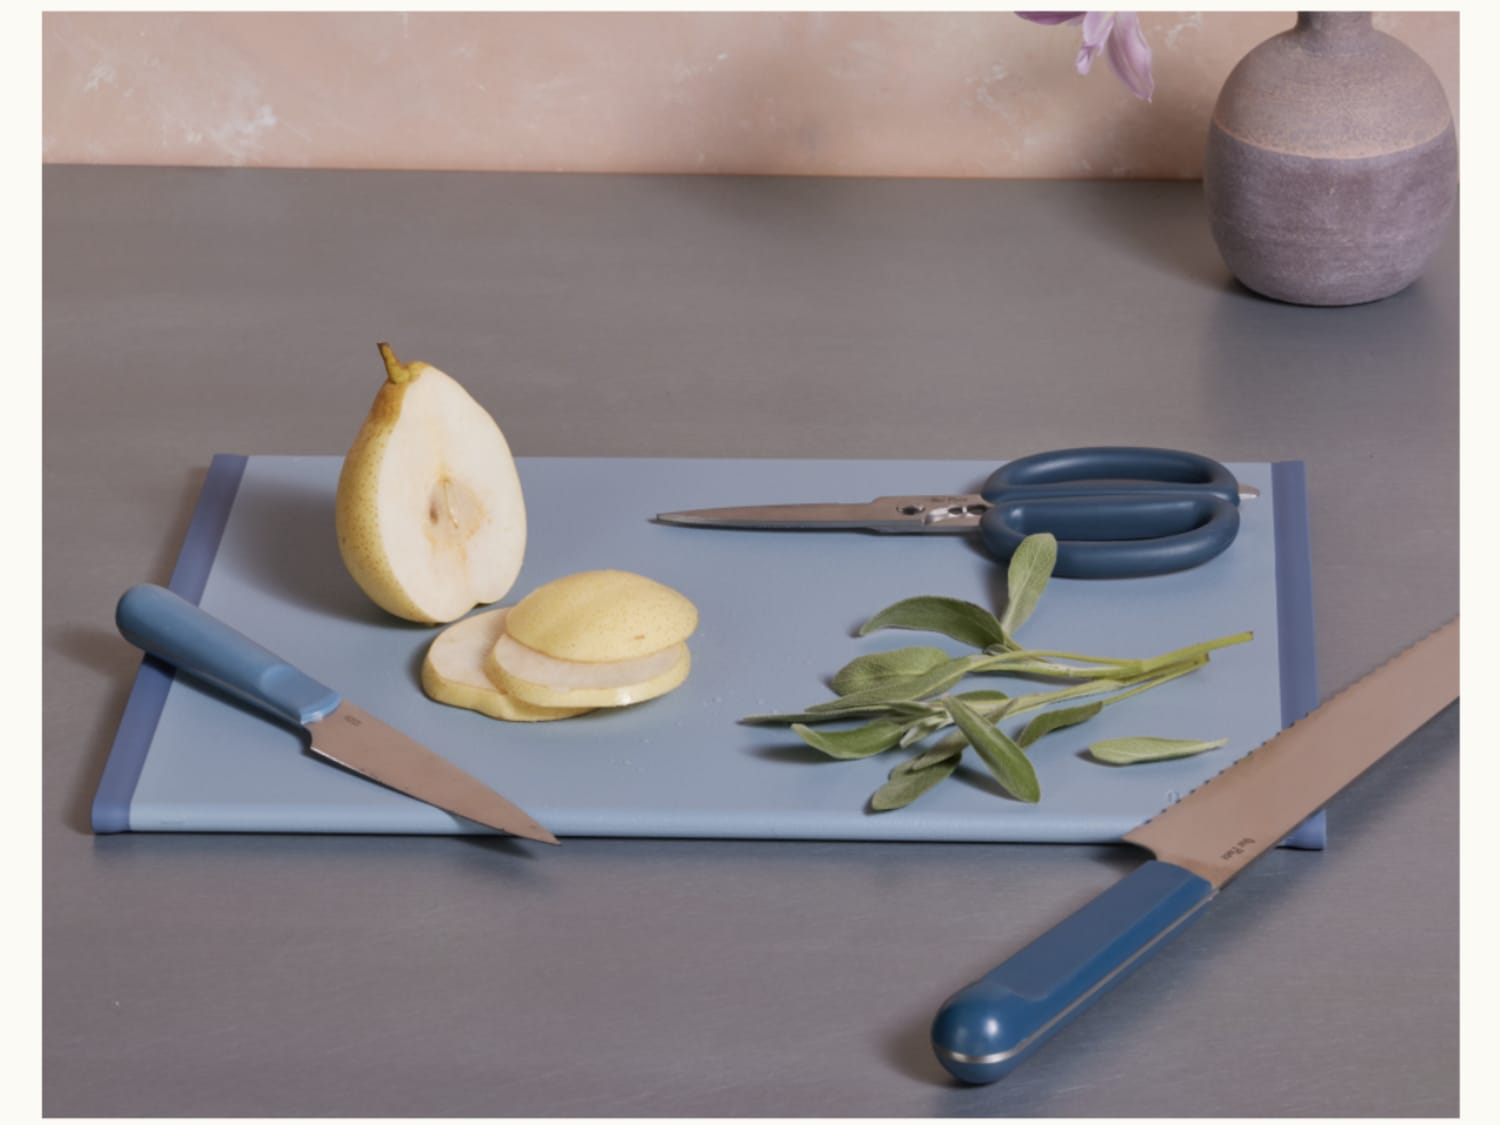 We Put Material's New Anti-Slip Cutting Board to the Test